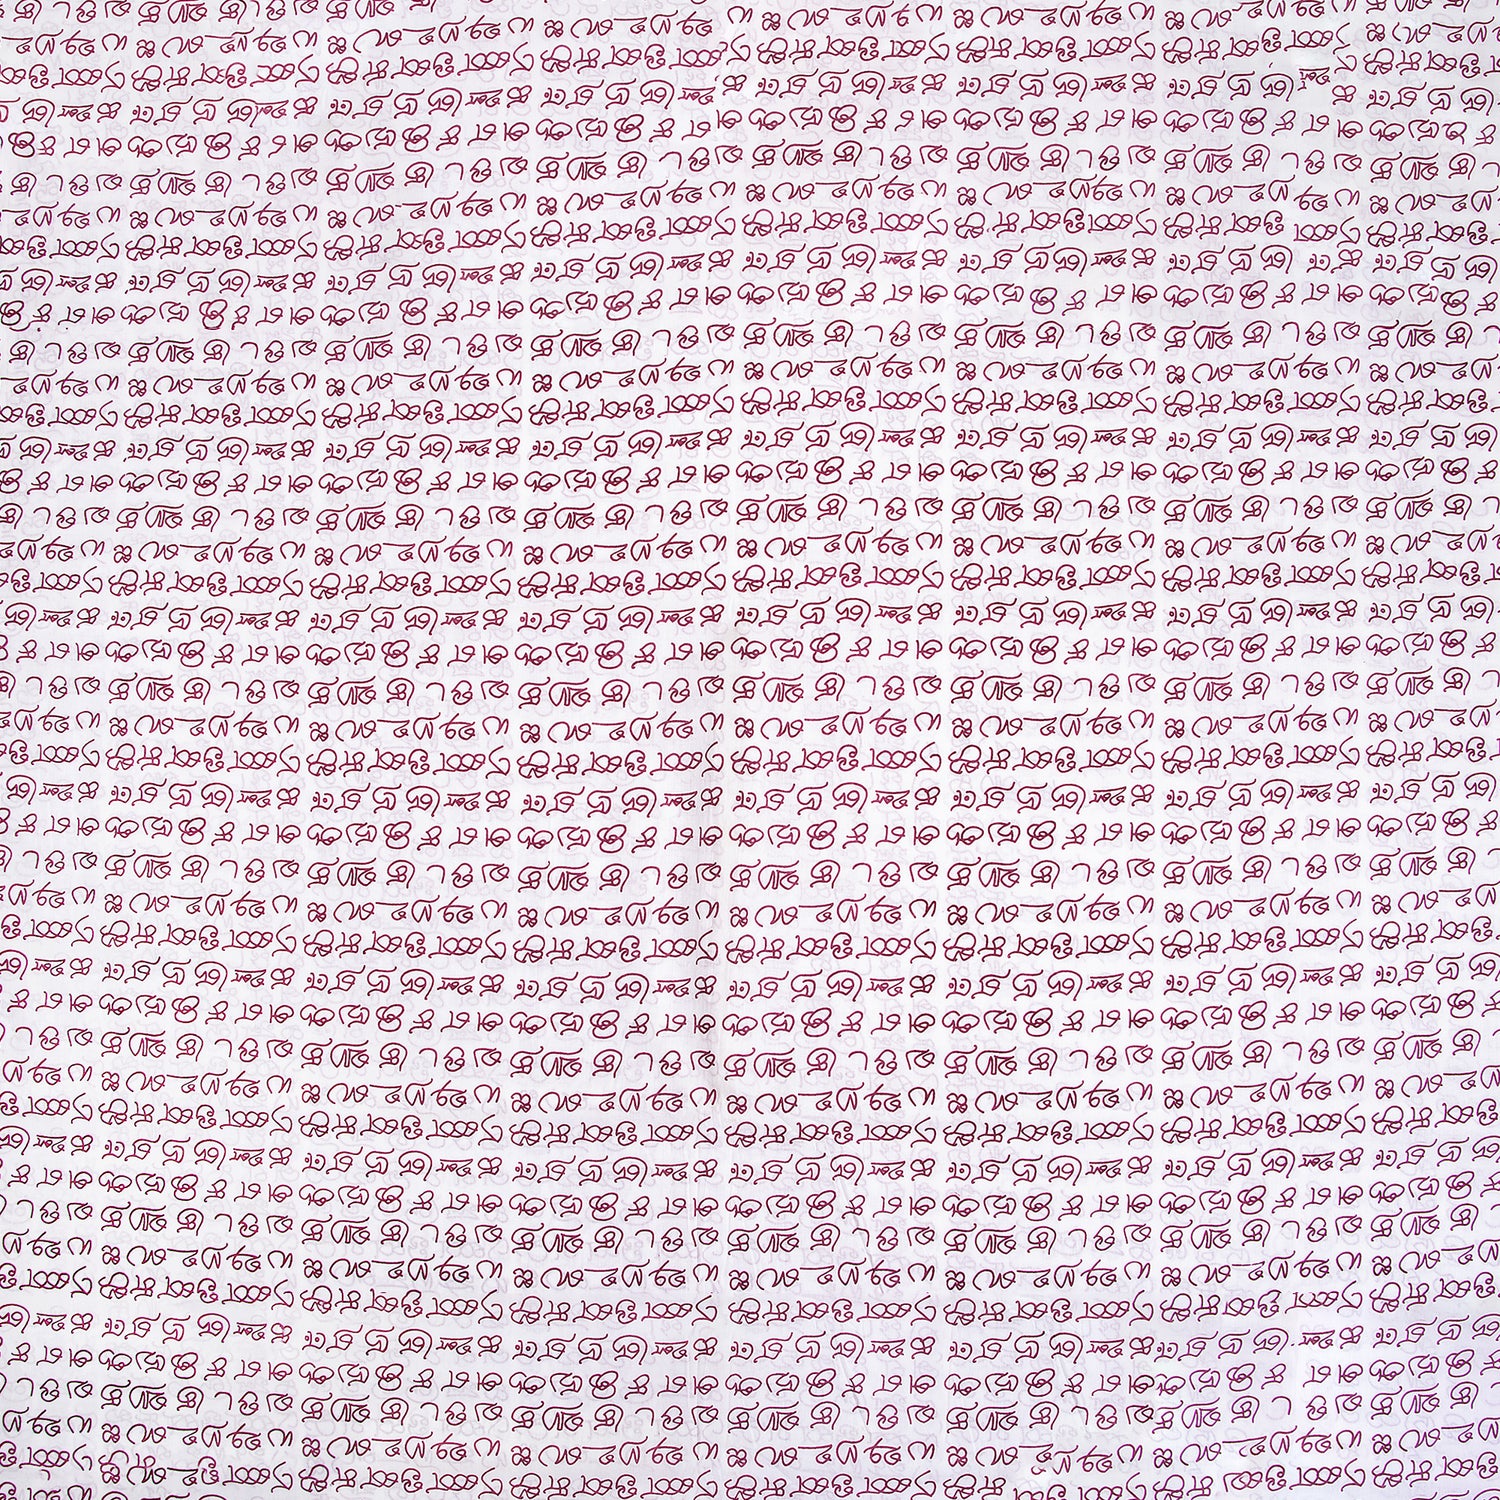 South Indian Languages Hand Block Fabric